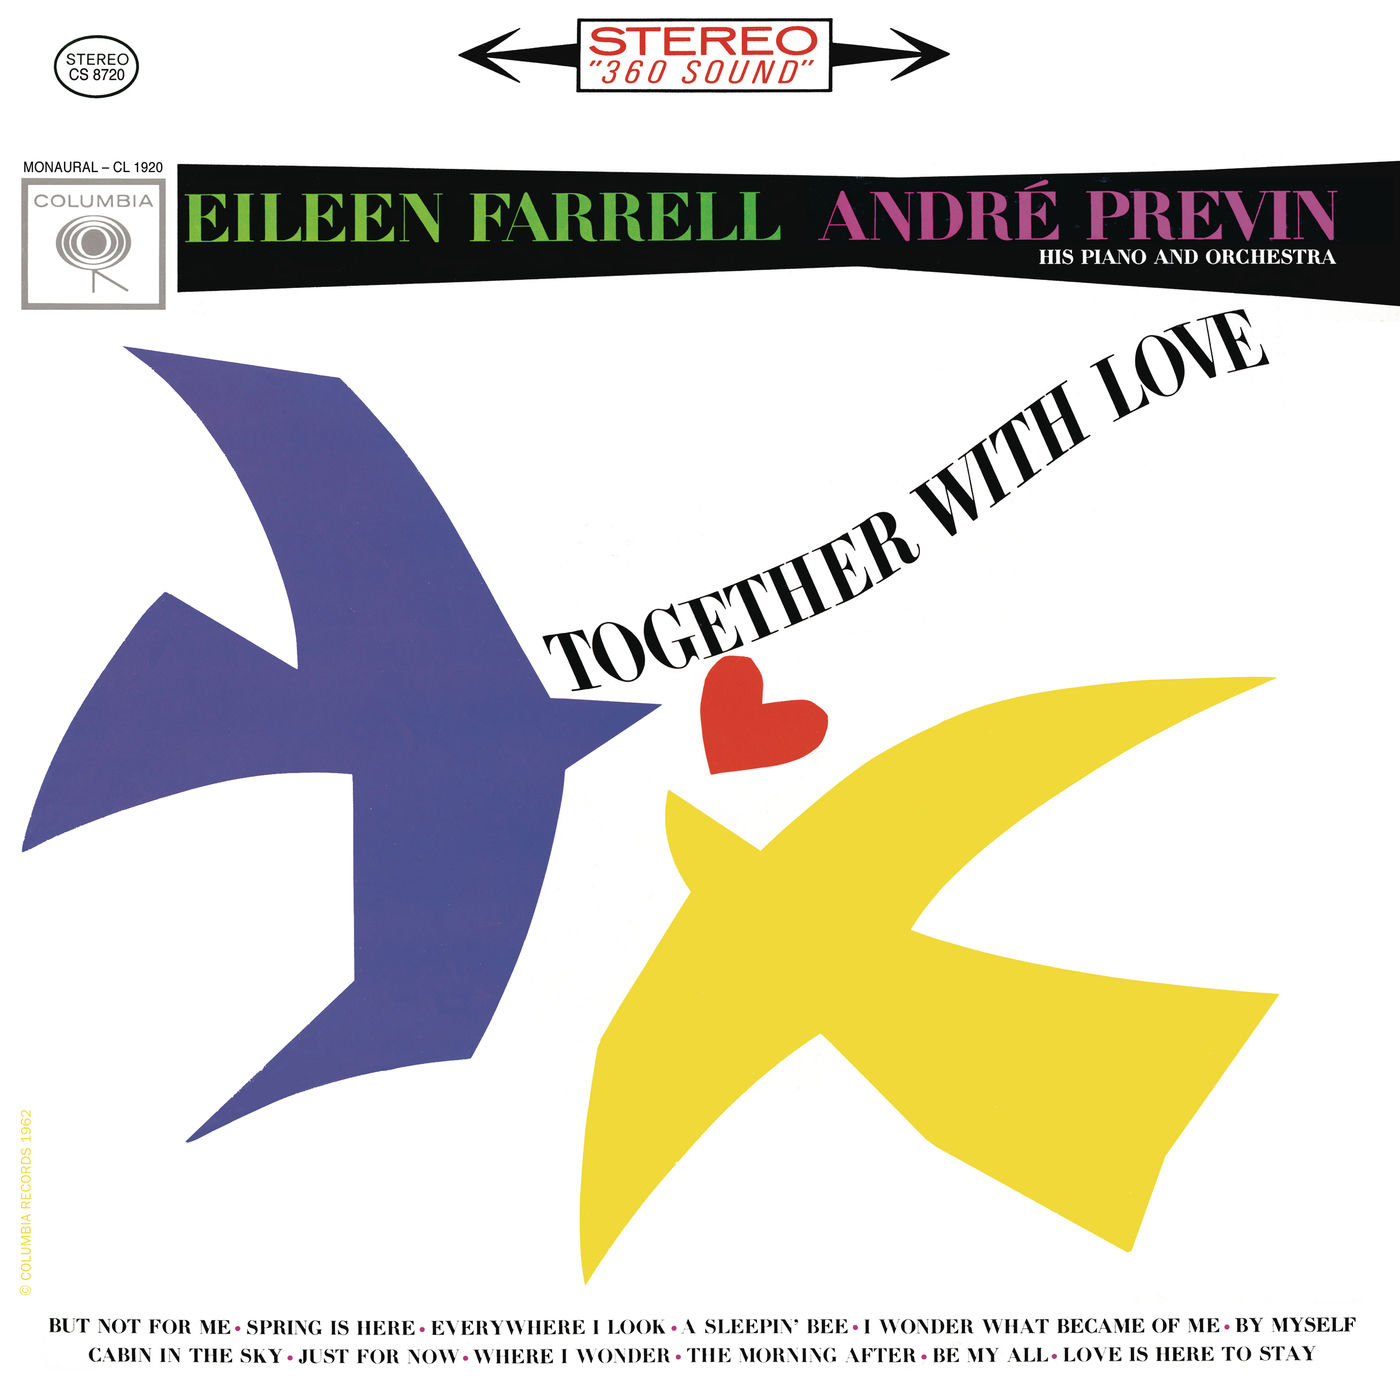 Eileen Farrell – Together with Love (Remastered) (2020) [FLAC 24bit/96kHz]